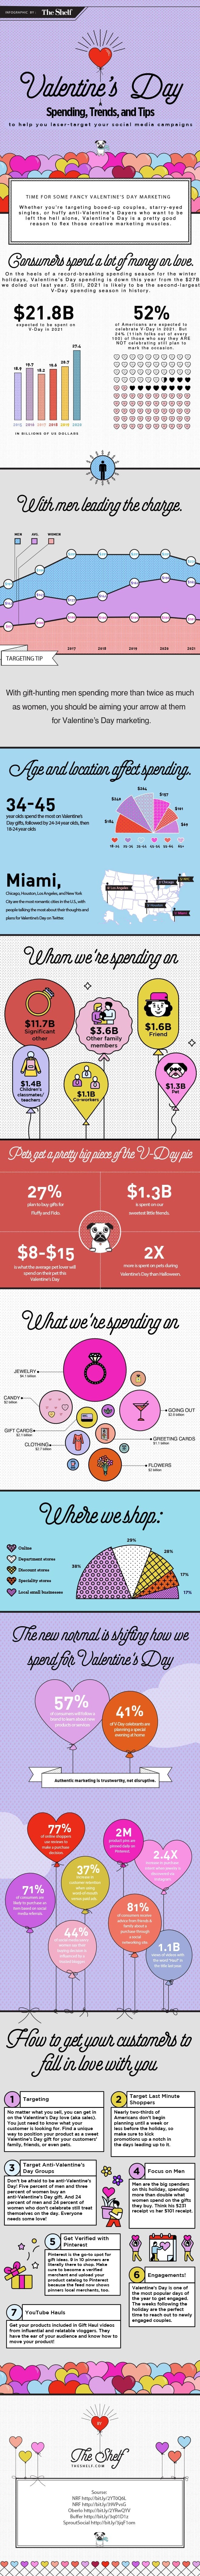 INFOGRAPHIC Valentine's Day Spending, Trends and Tips